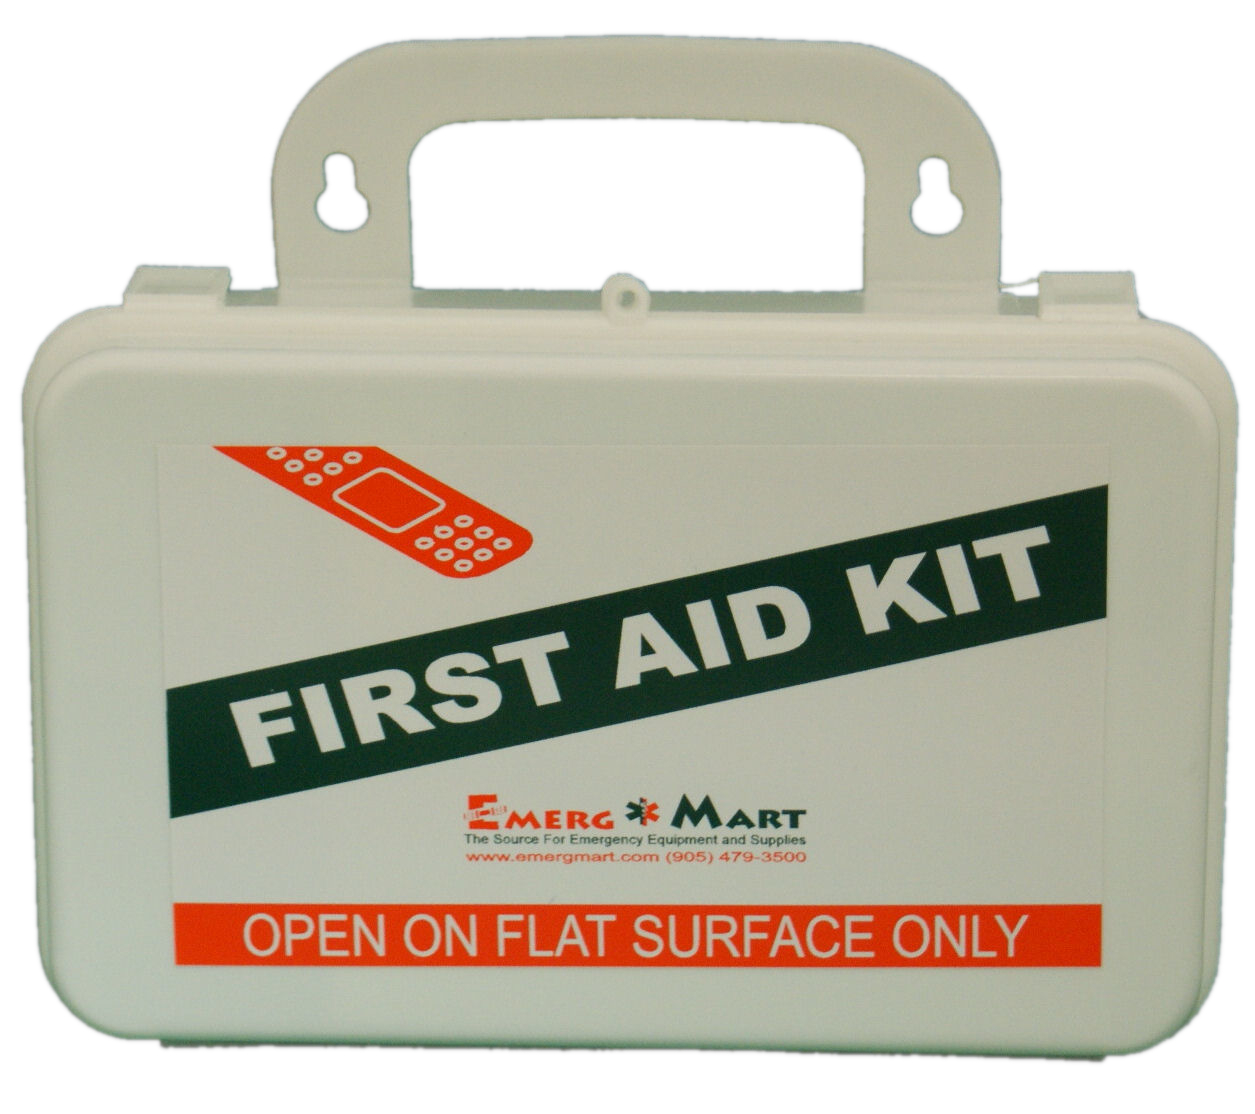 54051- Basic Home / Auto First Aid Kit (Plastic)